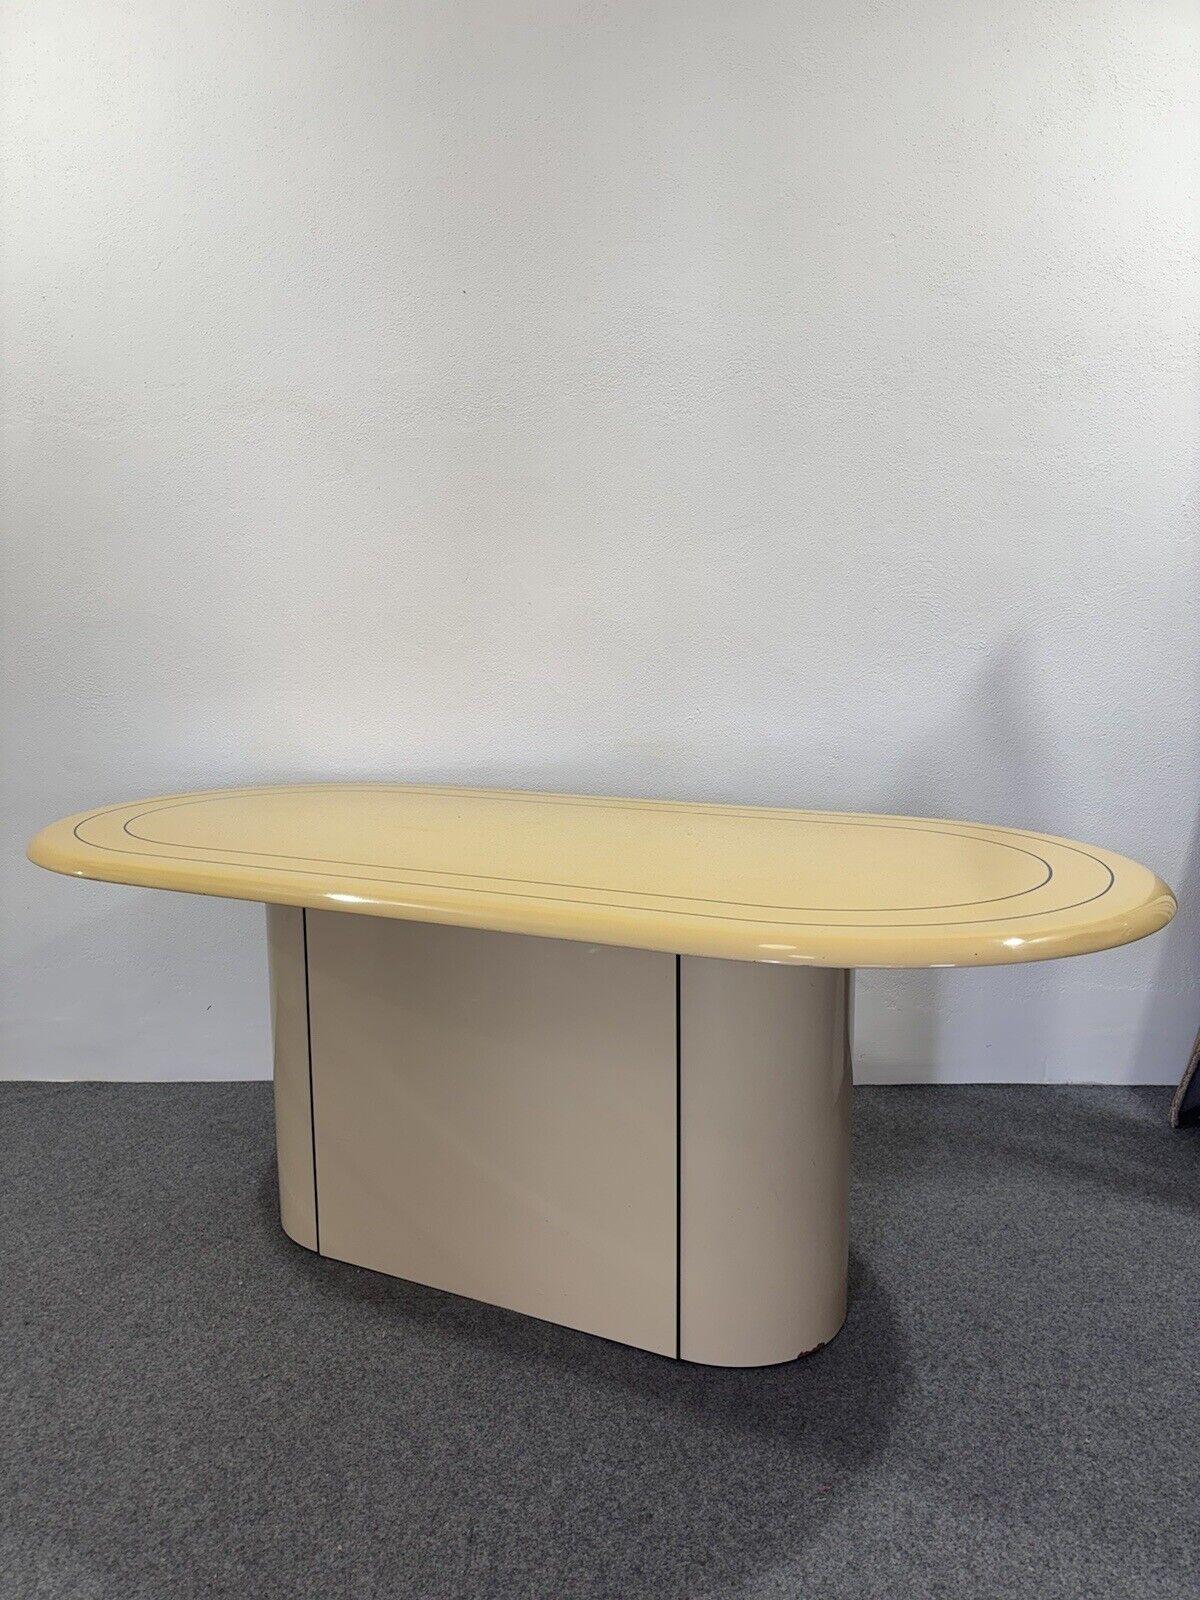 Italian Pierre Cardin Style Dining Table Wooden Modern Design 1970s For Sale